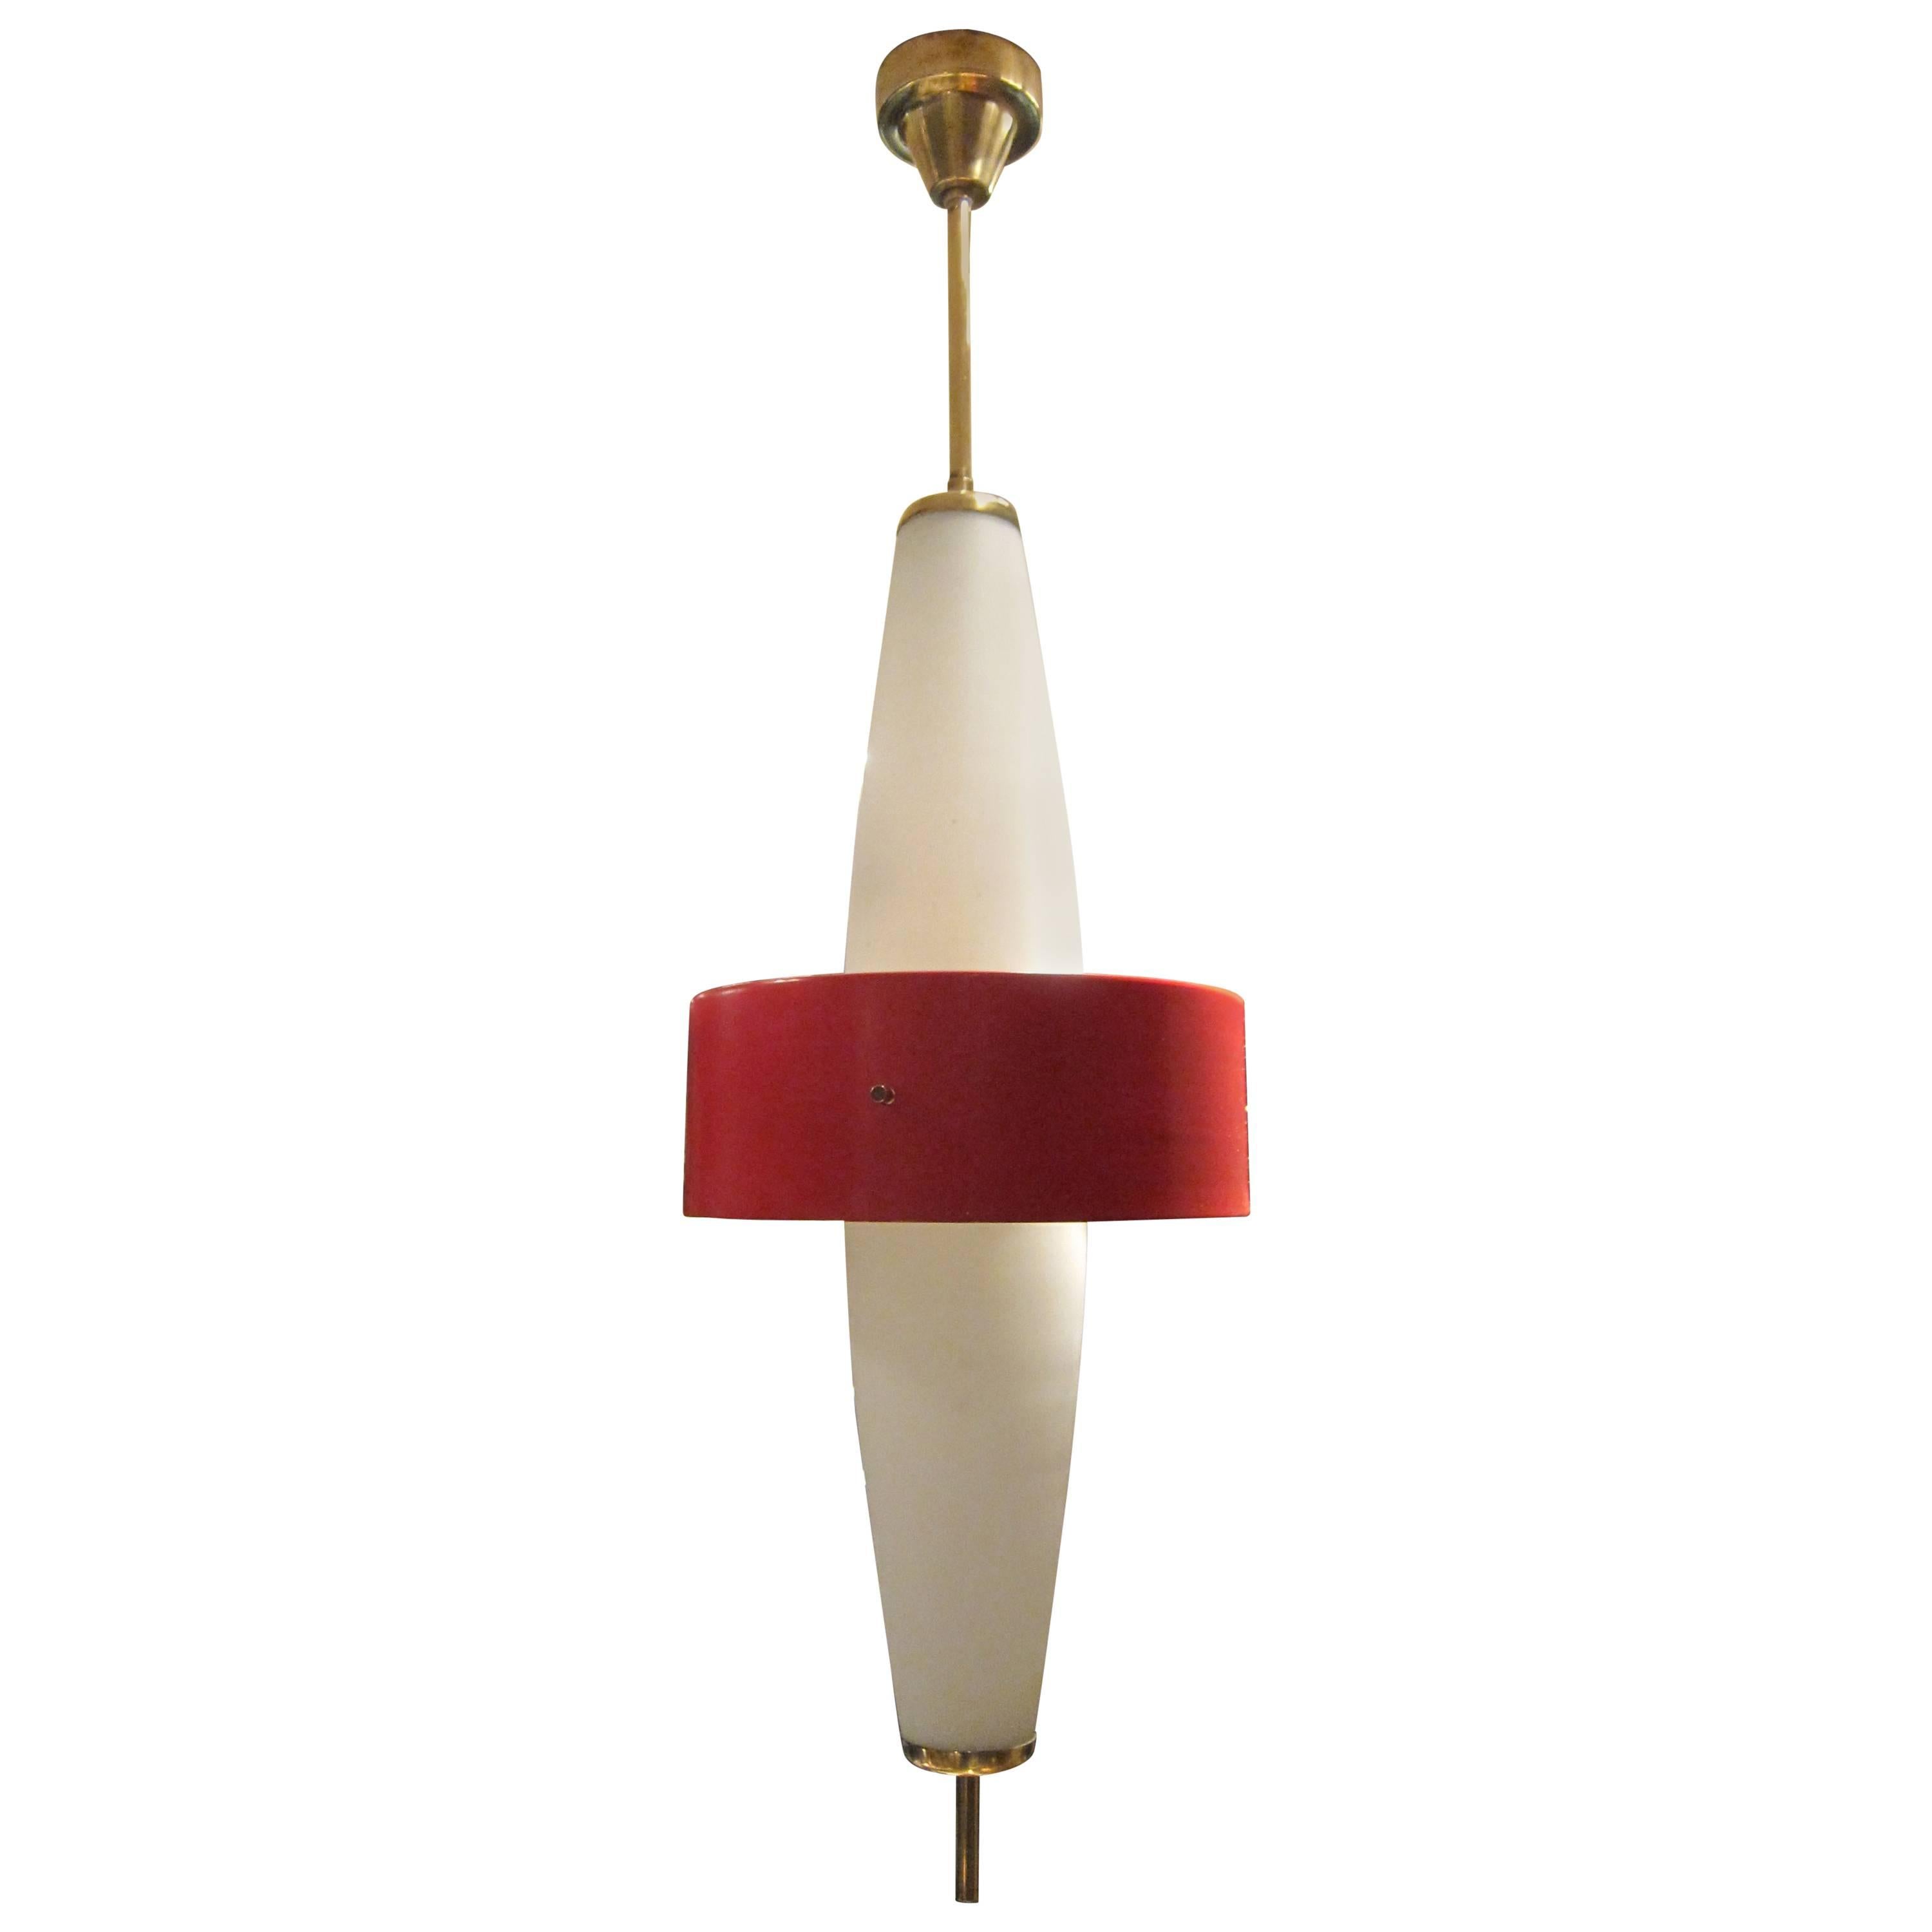 Angelo Brotto, "Esperia" Ceiling Lamp, Italy, 1950 For Sale